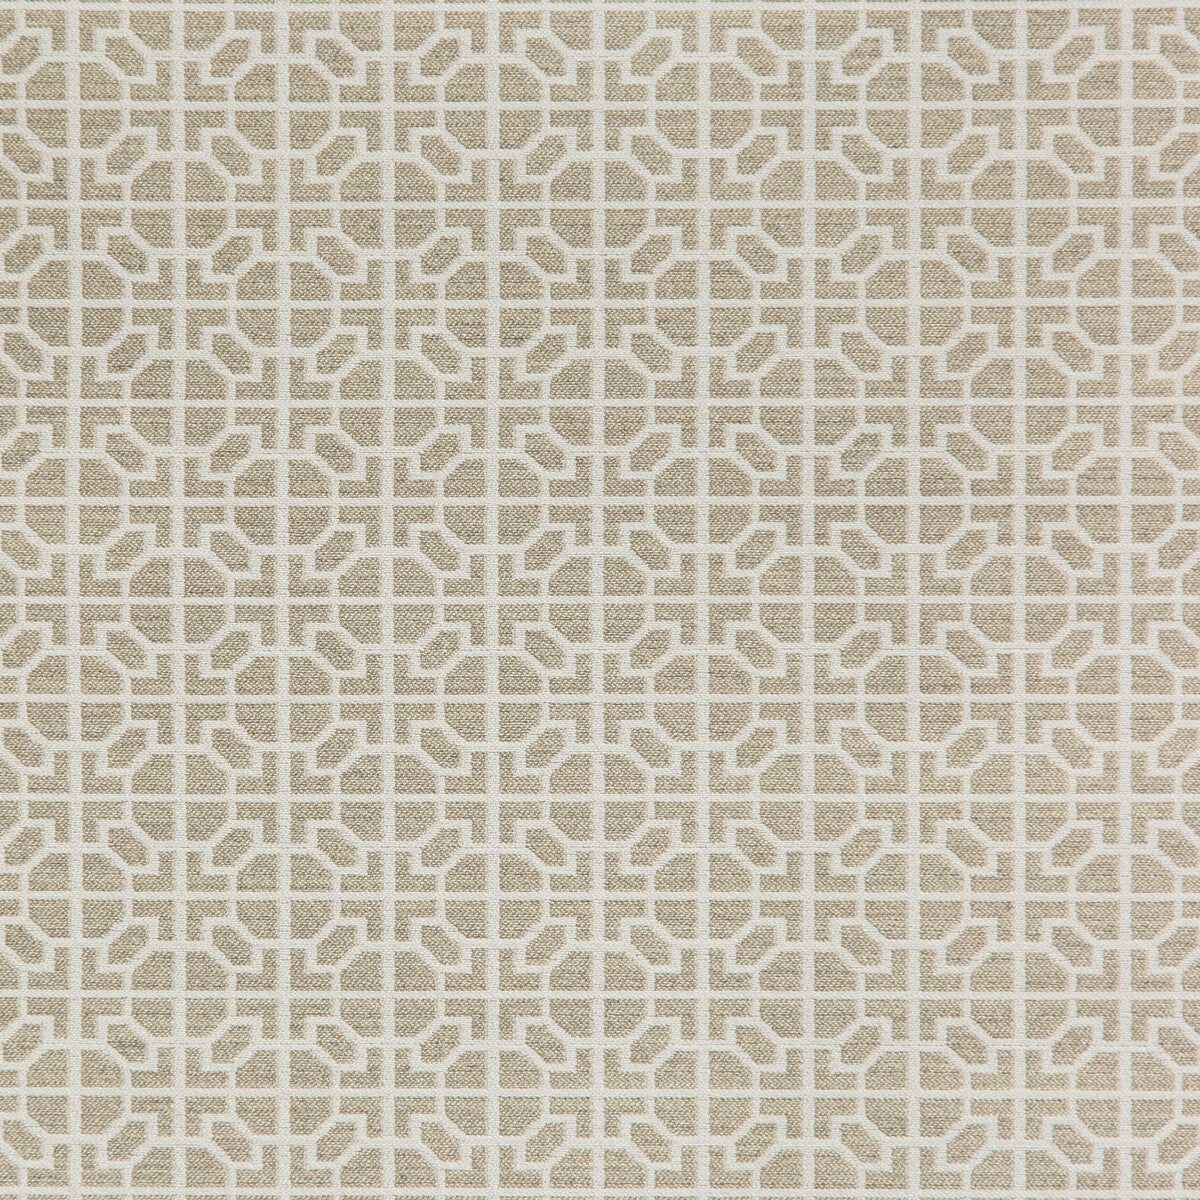 Raia fabric in sand color - pattern 35820.116.0 - by Kravet Design in the Indoor / Outdoor collection